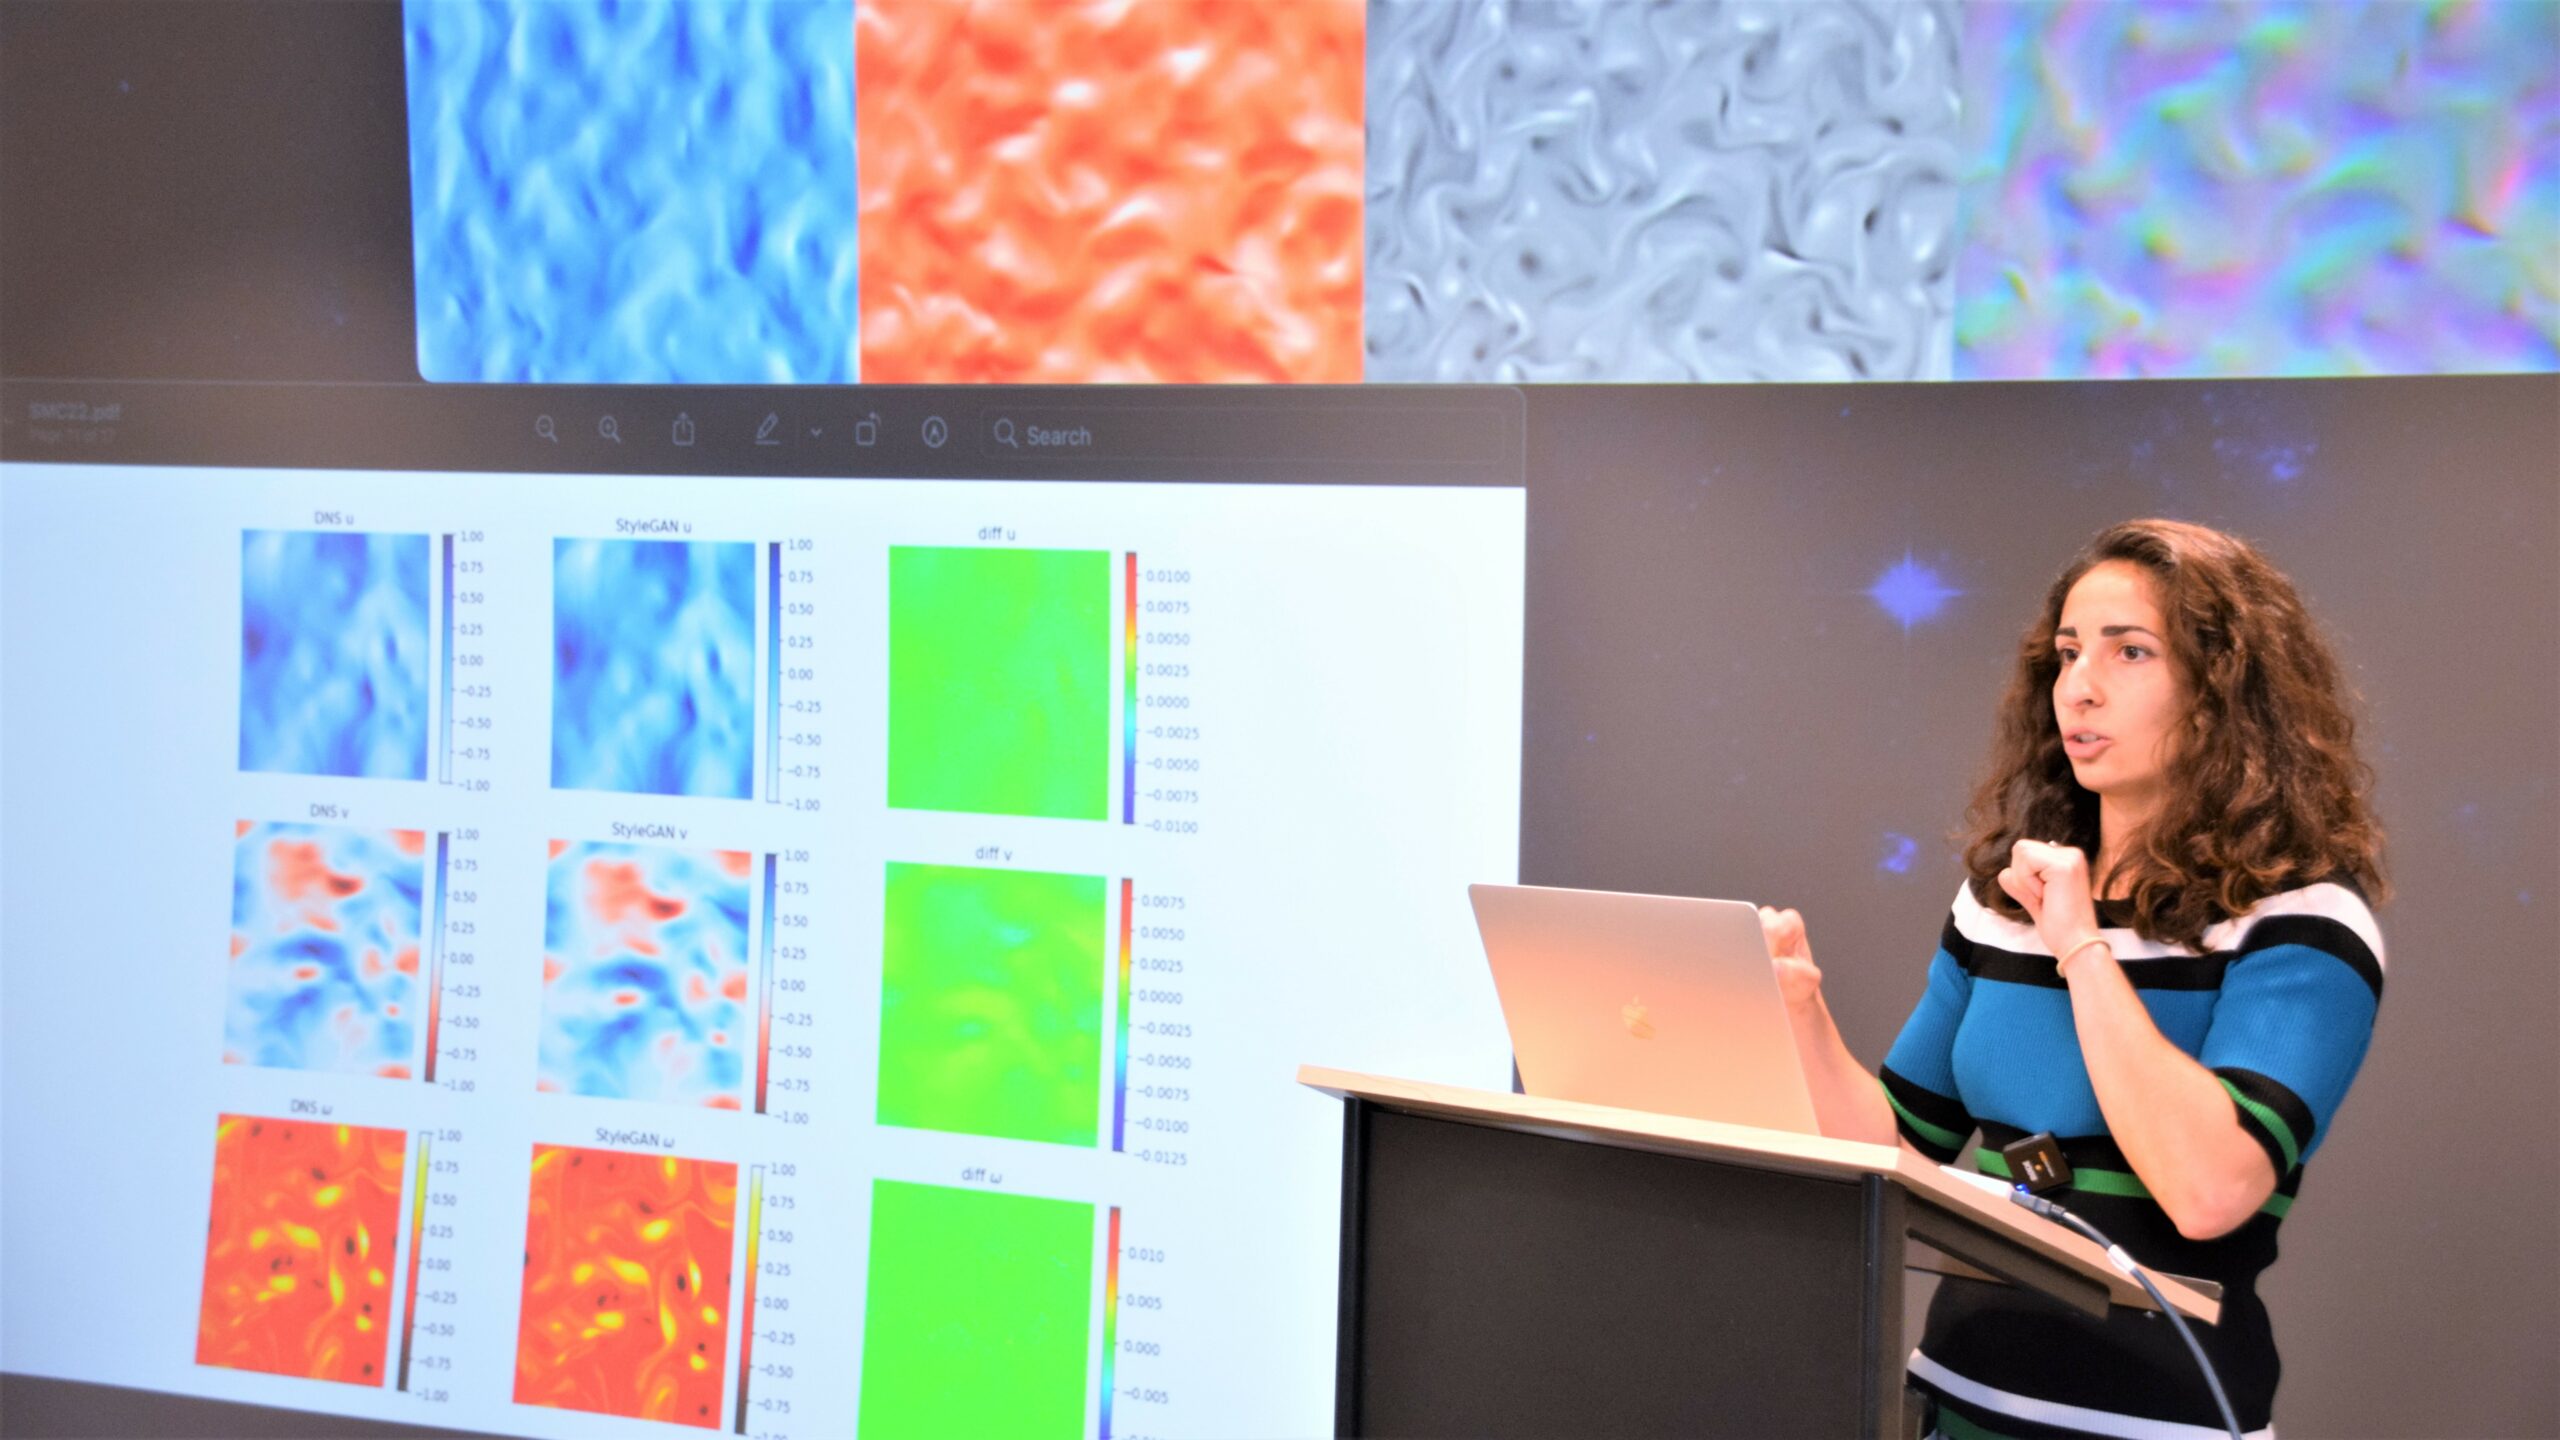 A woman stands at a lectern in front of a large screen displaying colourful simulations and scientific results.